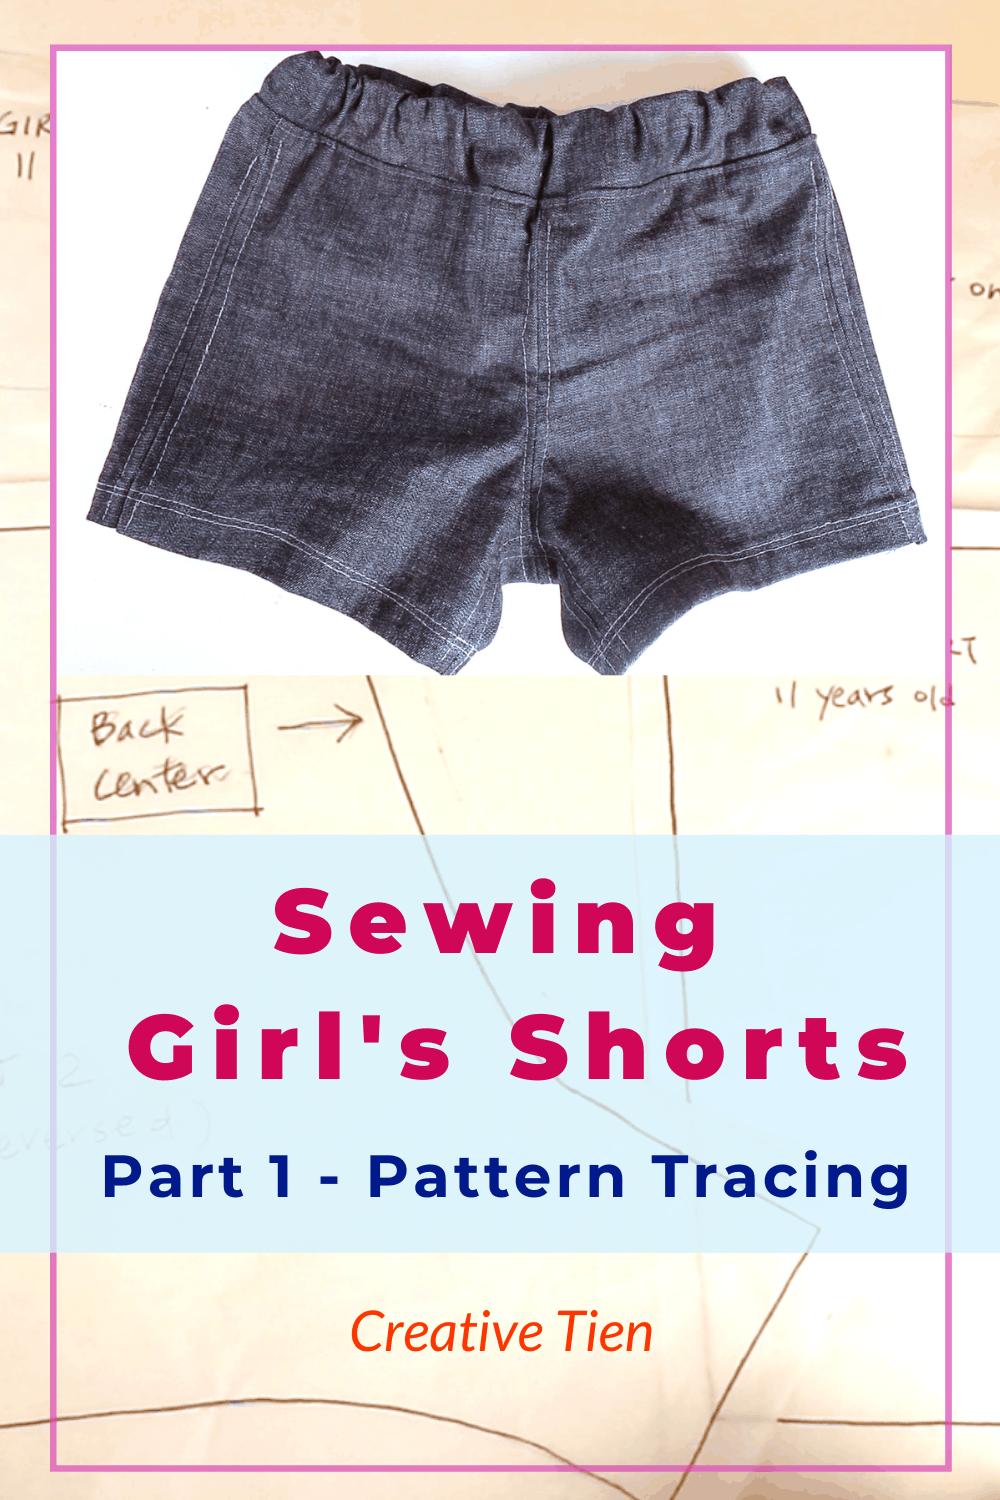 Sewing kid's shorts Part 1 - pattern tracing from your favorite garment